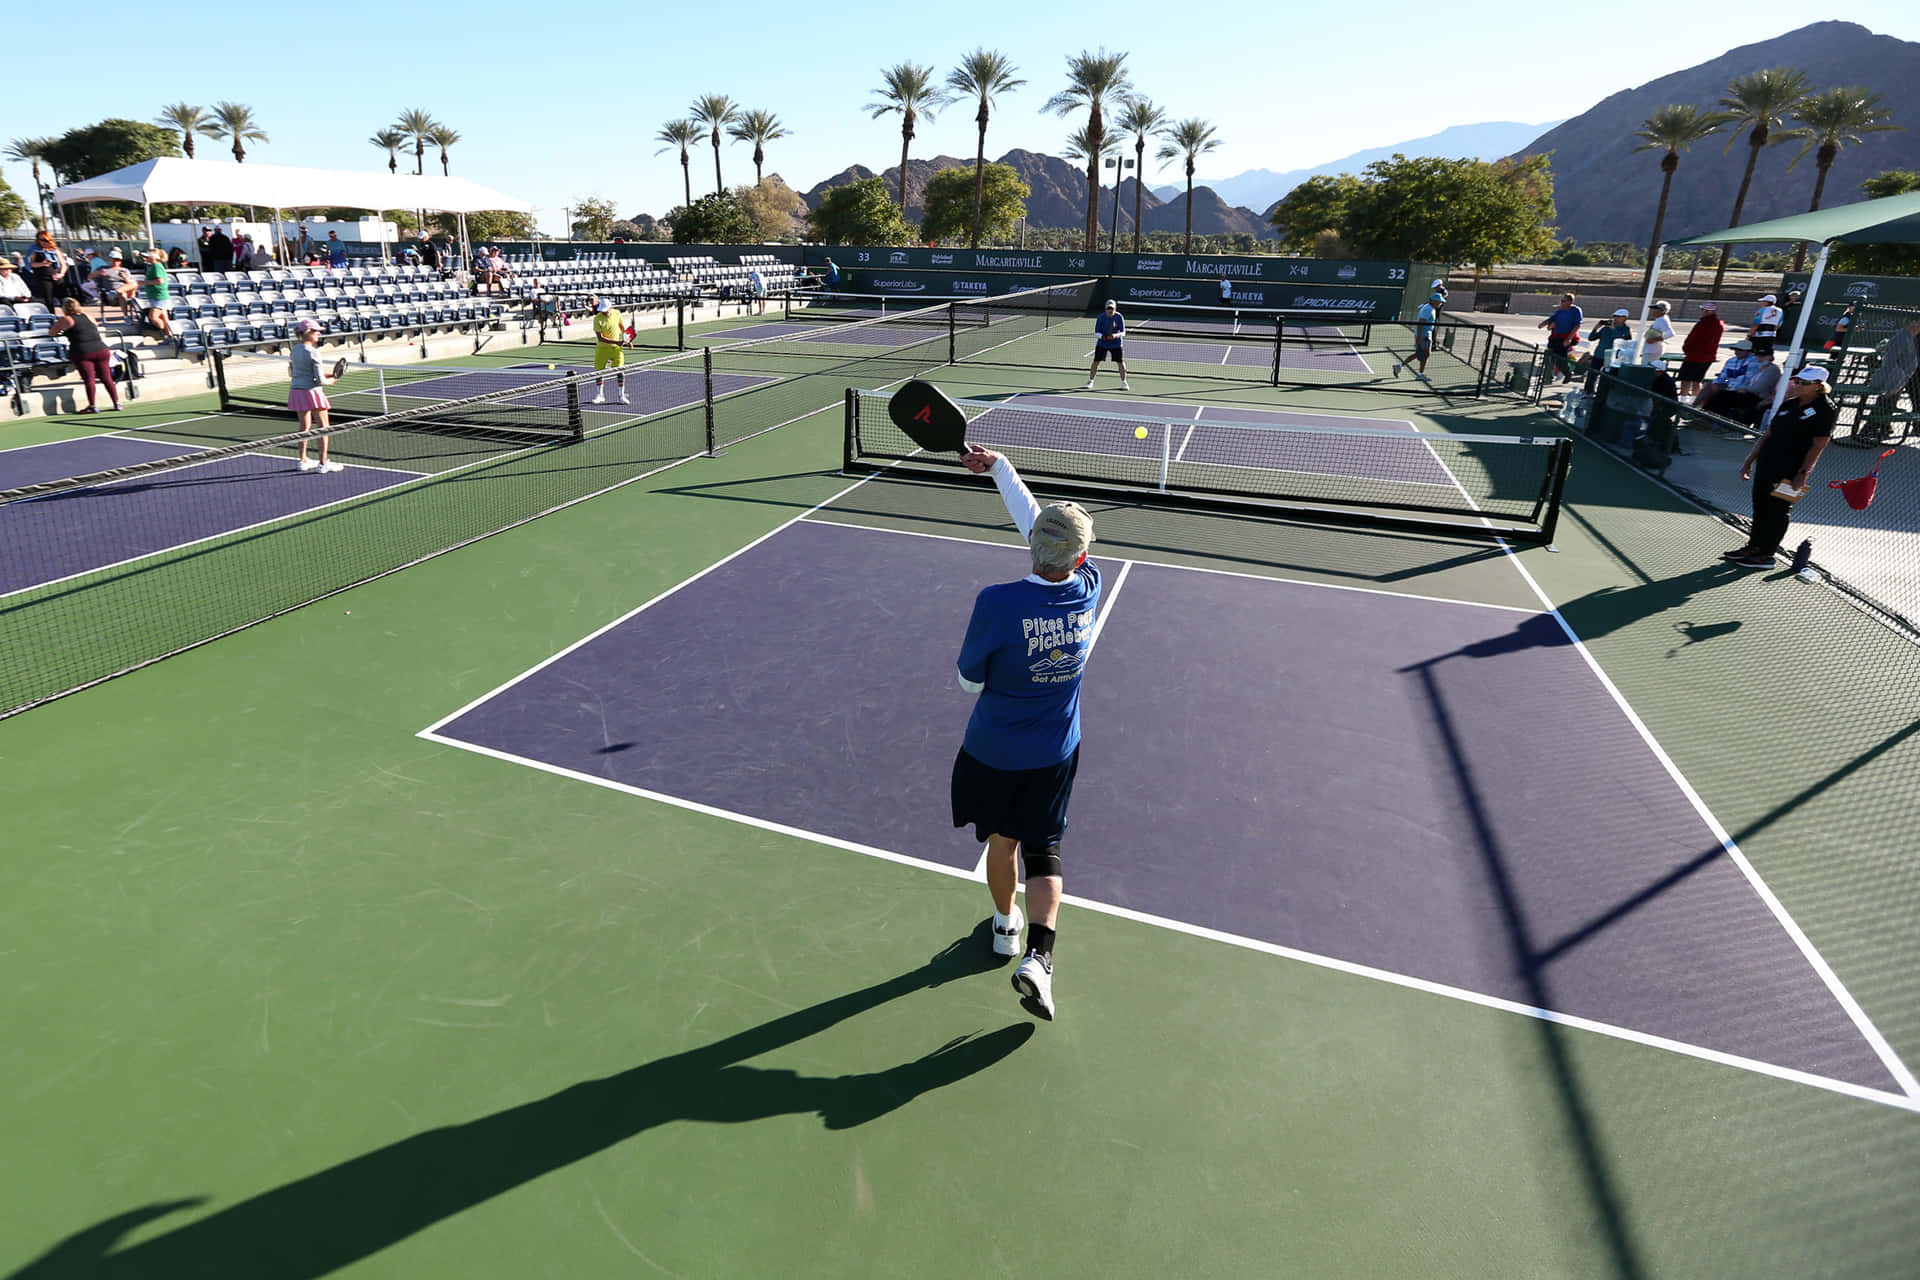 An exhilarating game of Pickleball in action